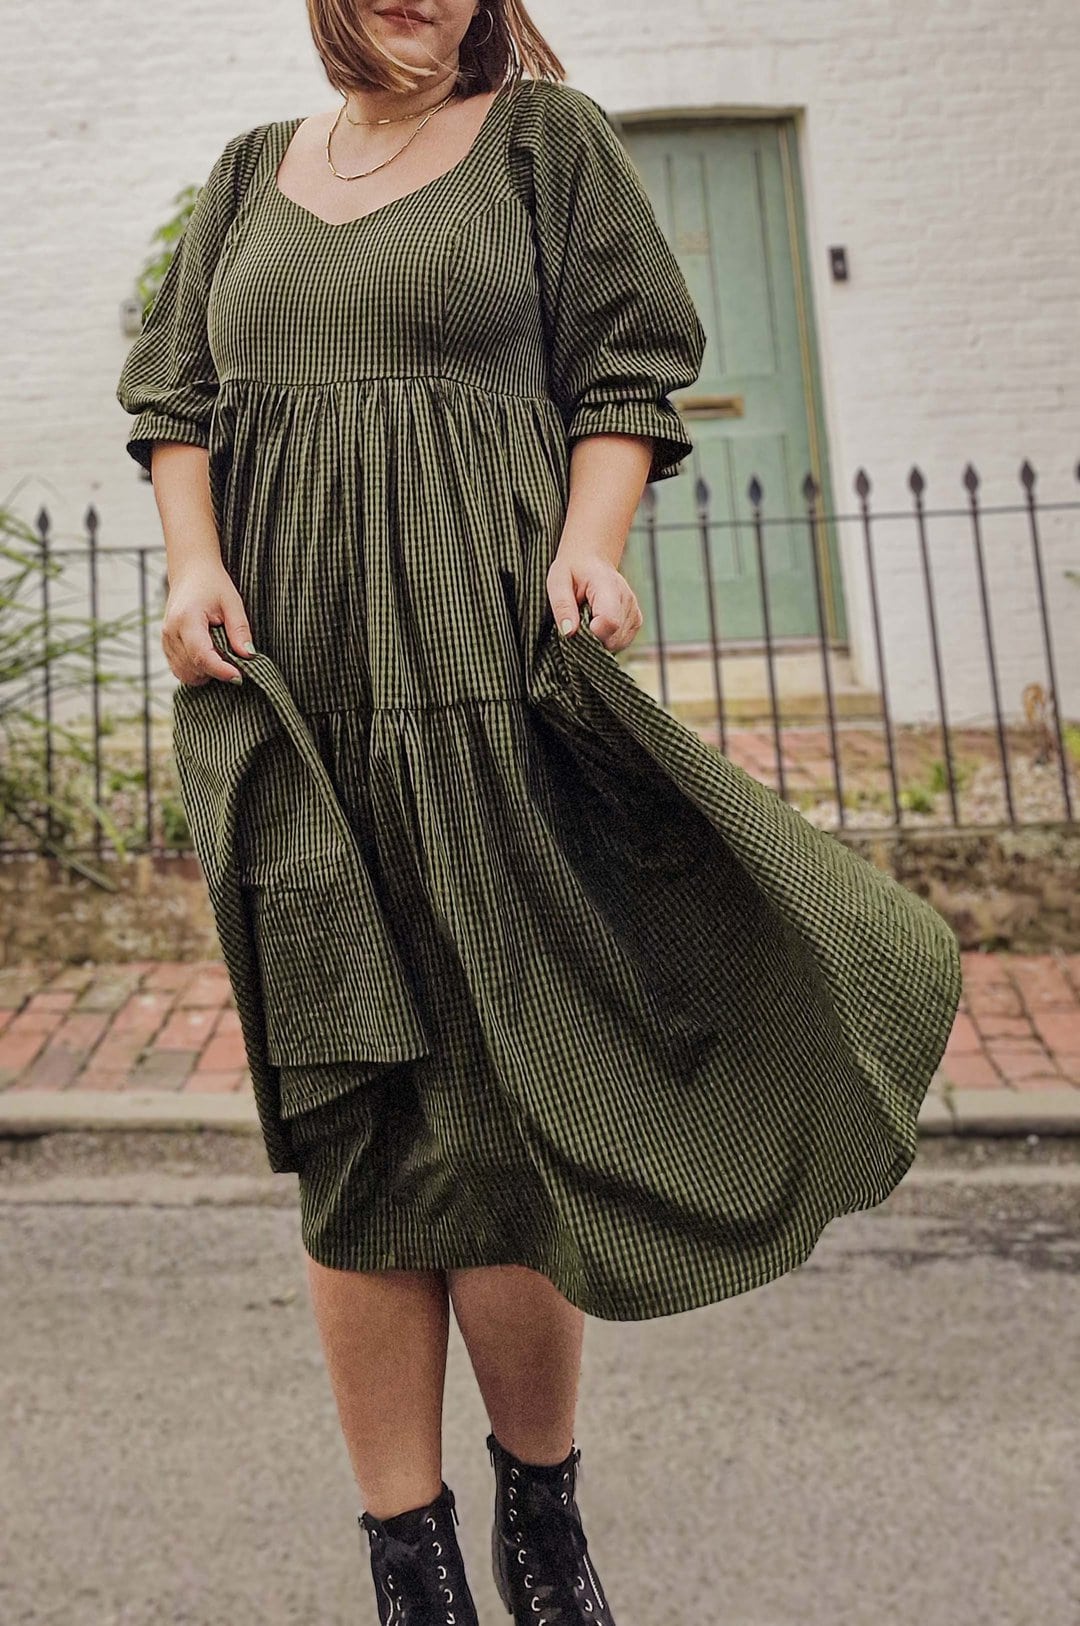 gingham dress green tiered with long sleeves sustainably made in britain by rose corps using organic cotton